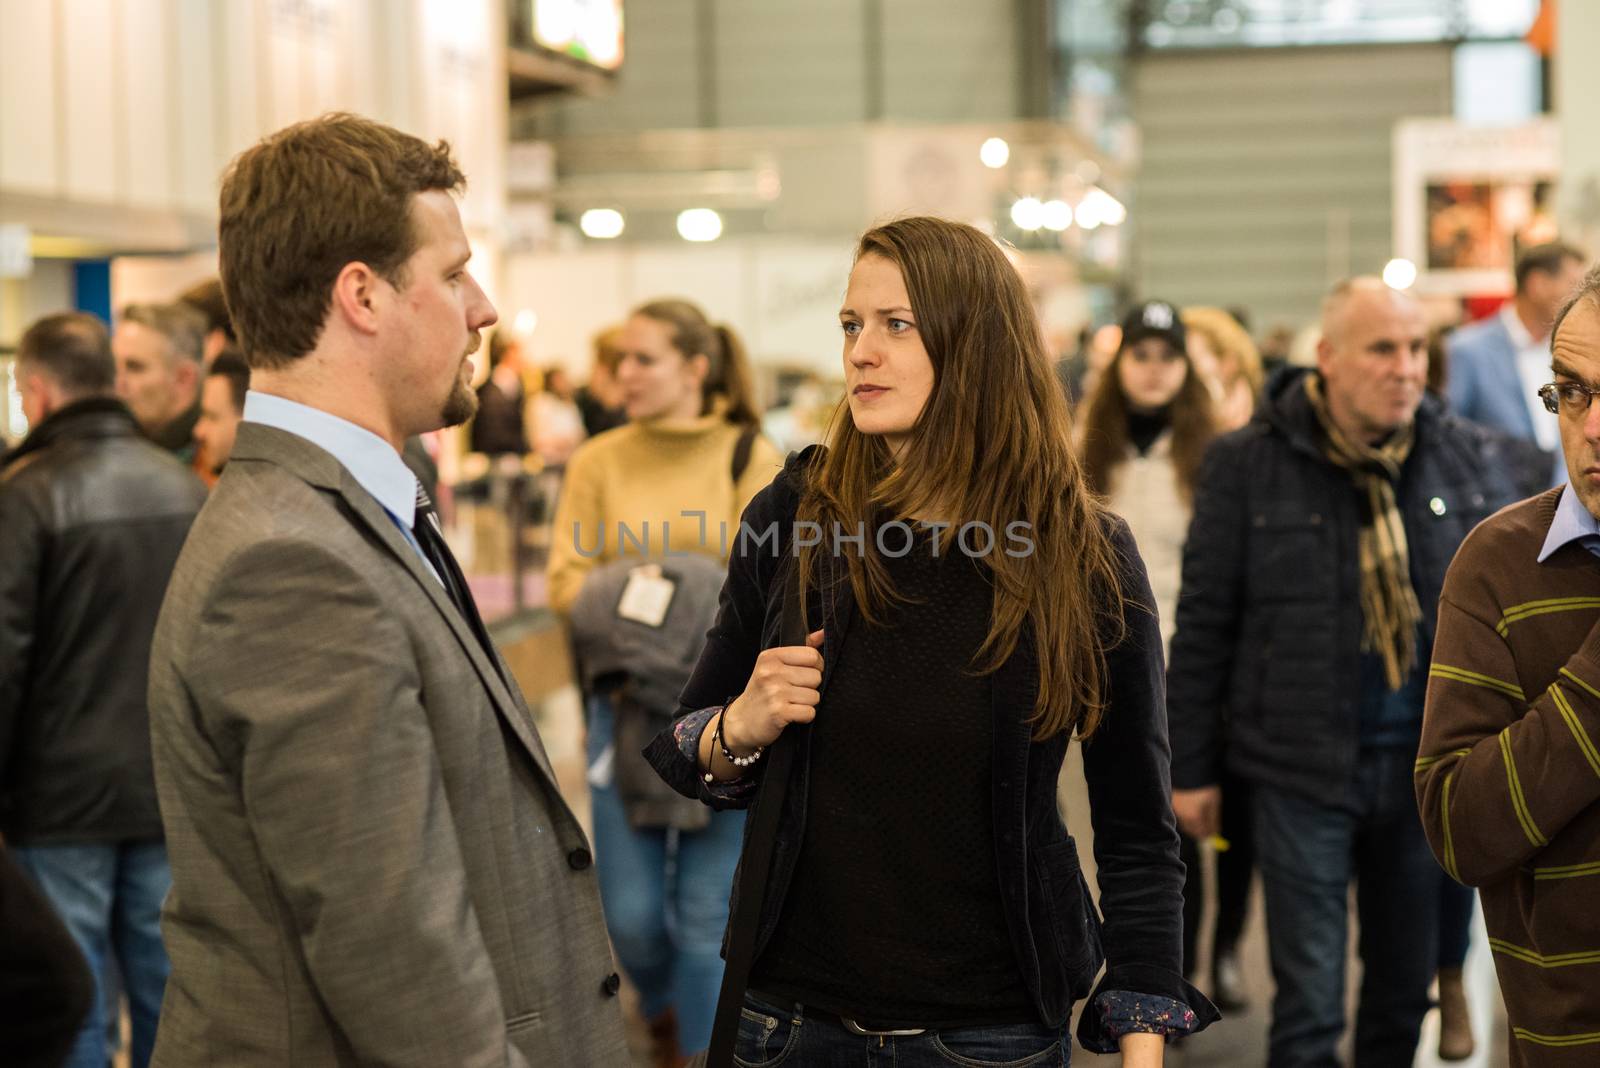 03/04/2017. Brno, Czech Republic. Man and woman walking in the crowd attending an event at the convention trade center in Brno. BVV Brno Exhibition center. Czech Republic by gonzalobell